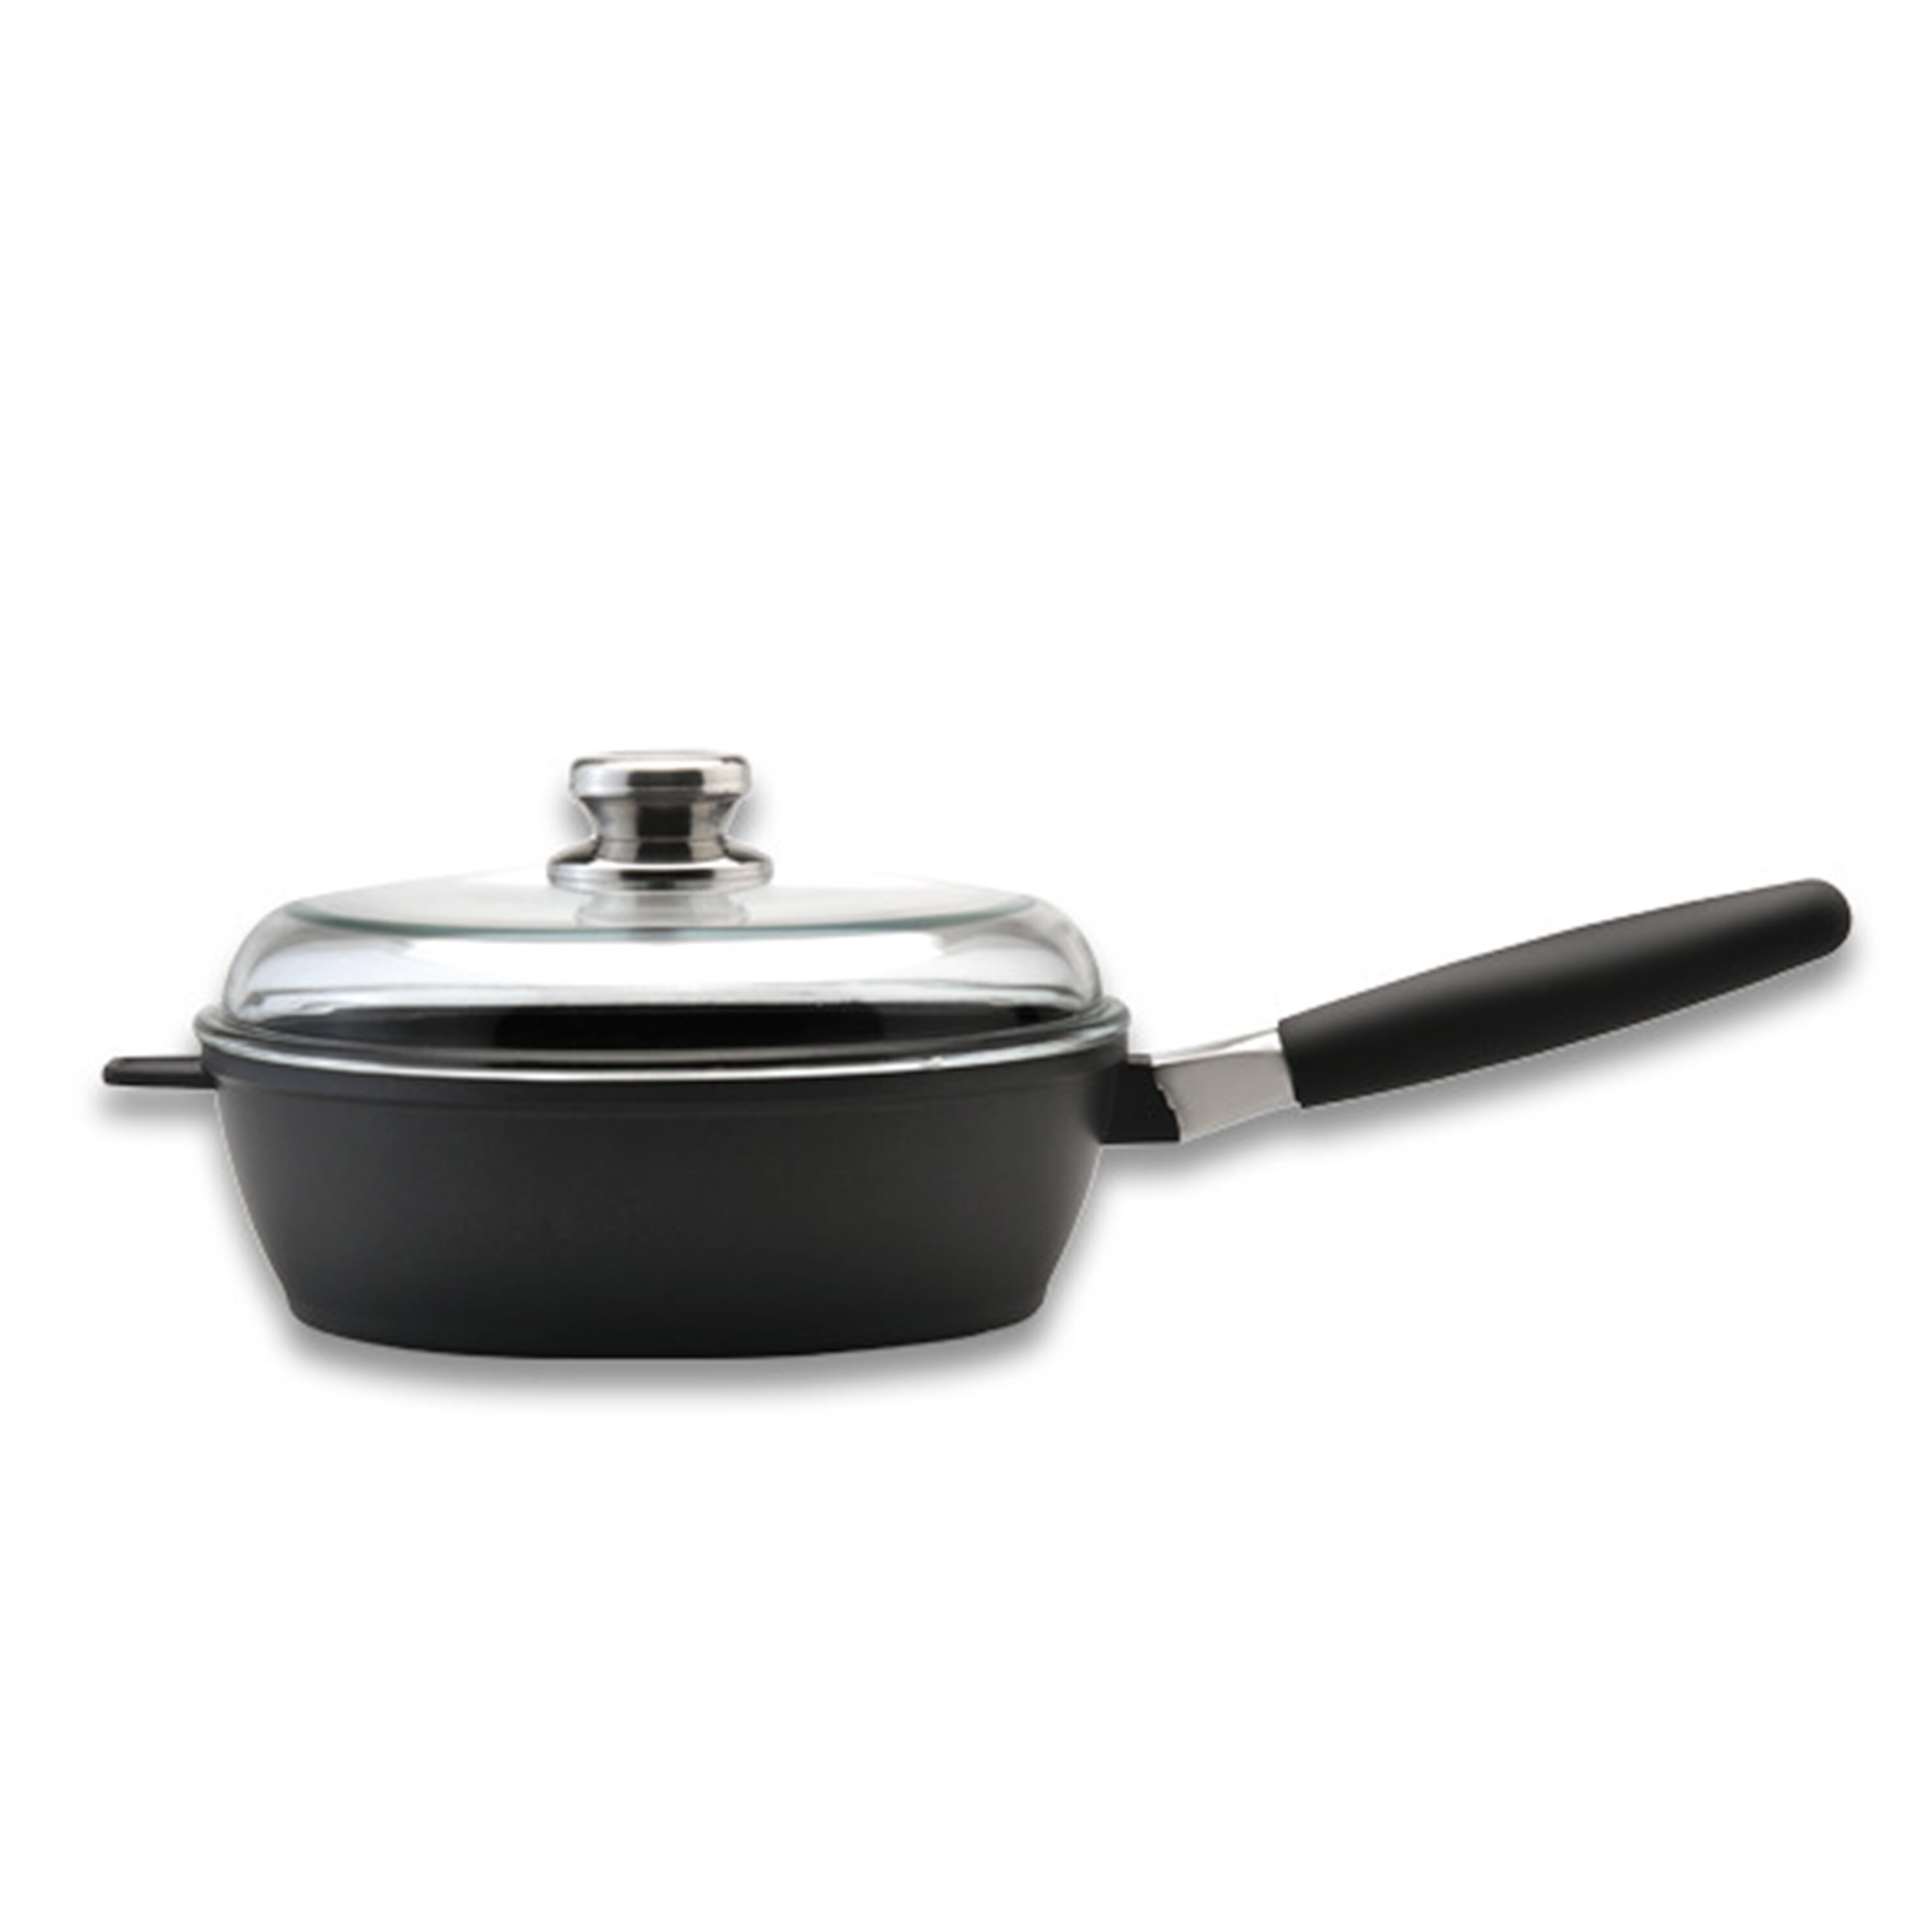 BergHOFF Essentials 5pc Non-Stick Hard Anodized Cookware Set for Two with Glass Lid, Black